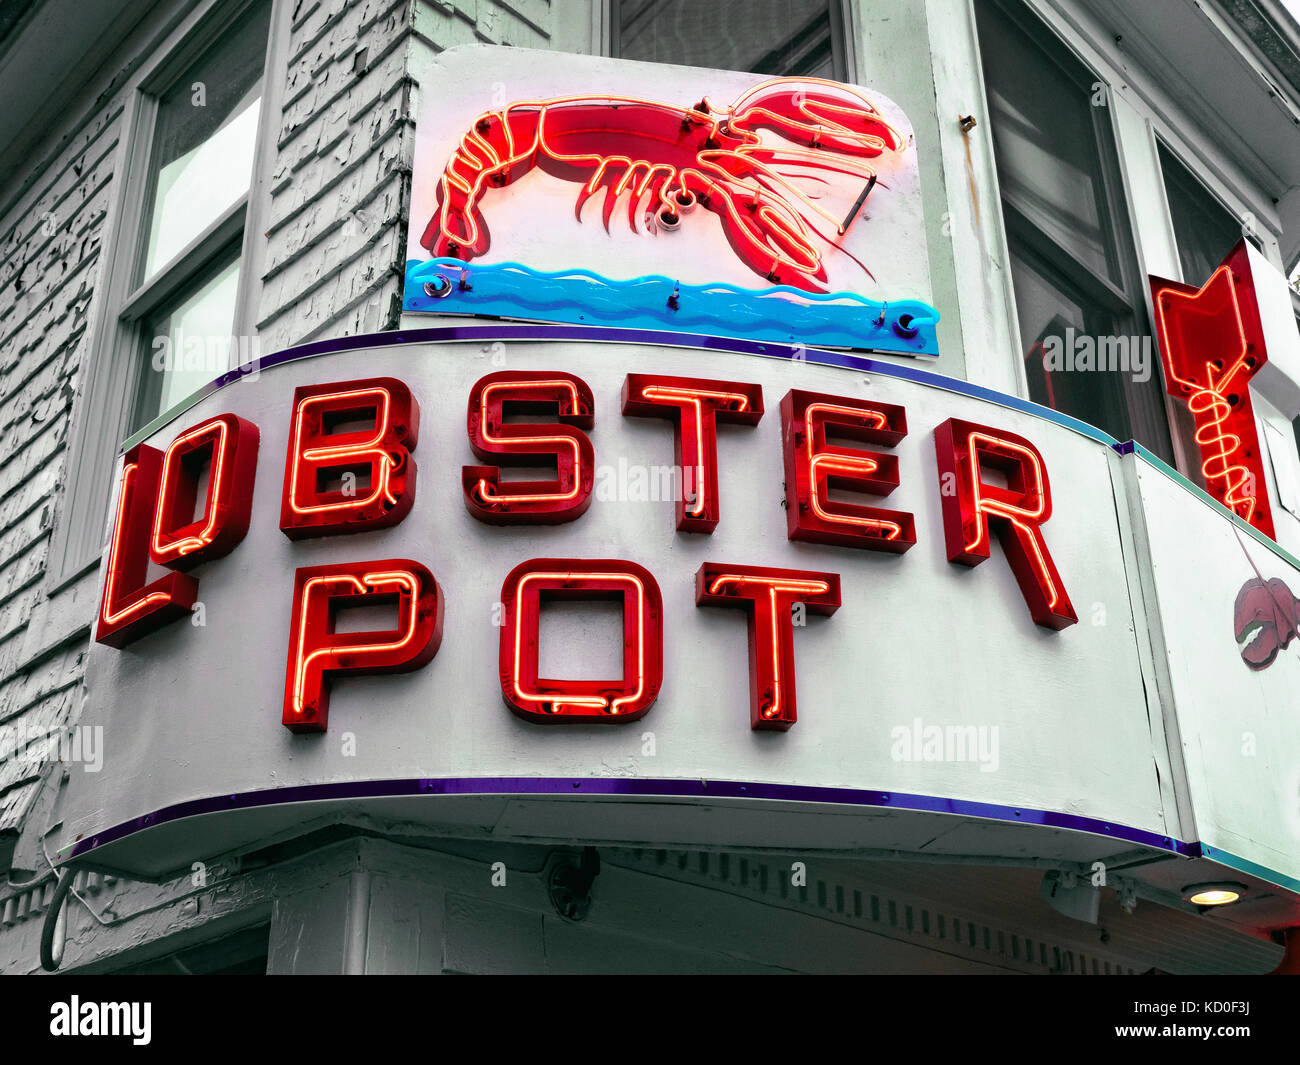 Lobster Pot Fish Restaurant in Provincetown MA USA Stock Photo